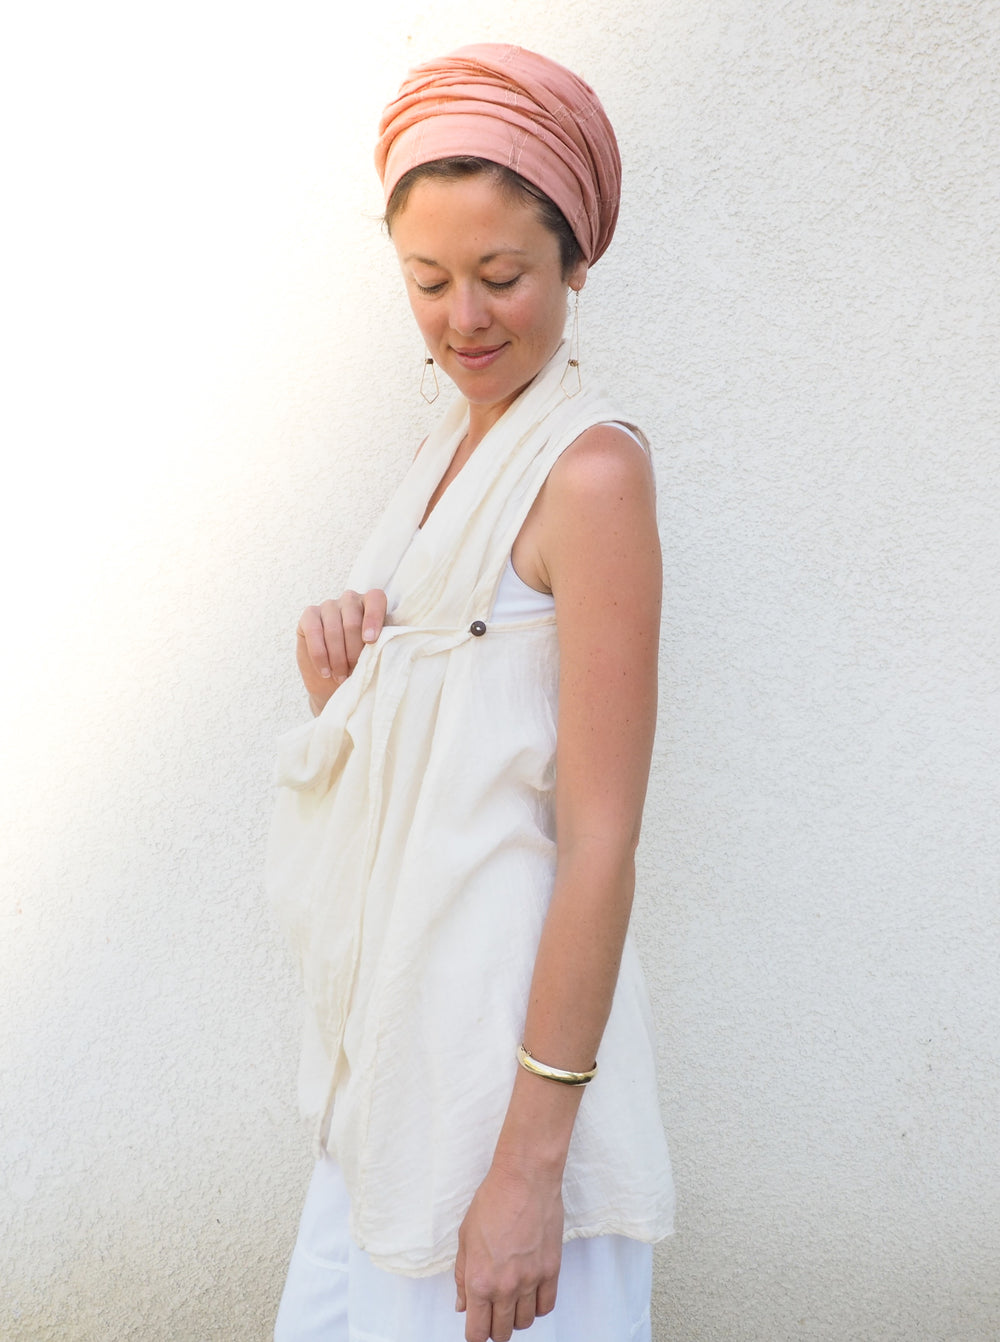 Female model wears peach head wrap, un-dyed vest over a white shirt and white pants. She is showing the button on the best. She stands against a white stucco wall.